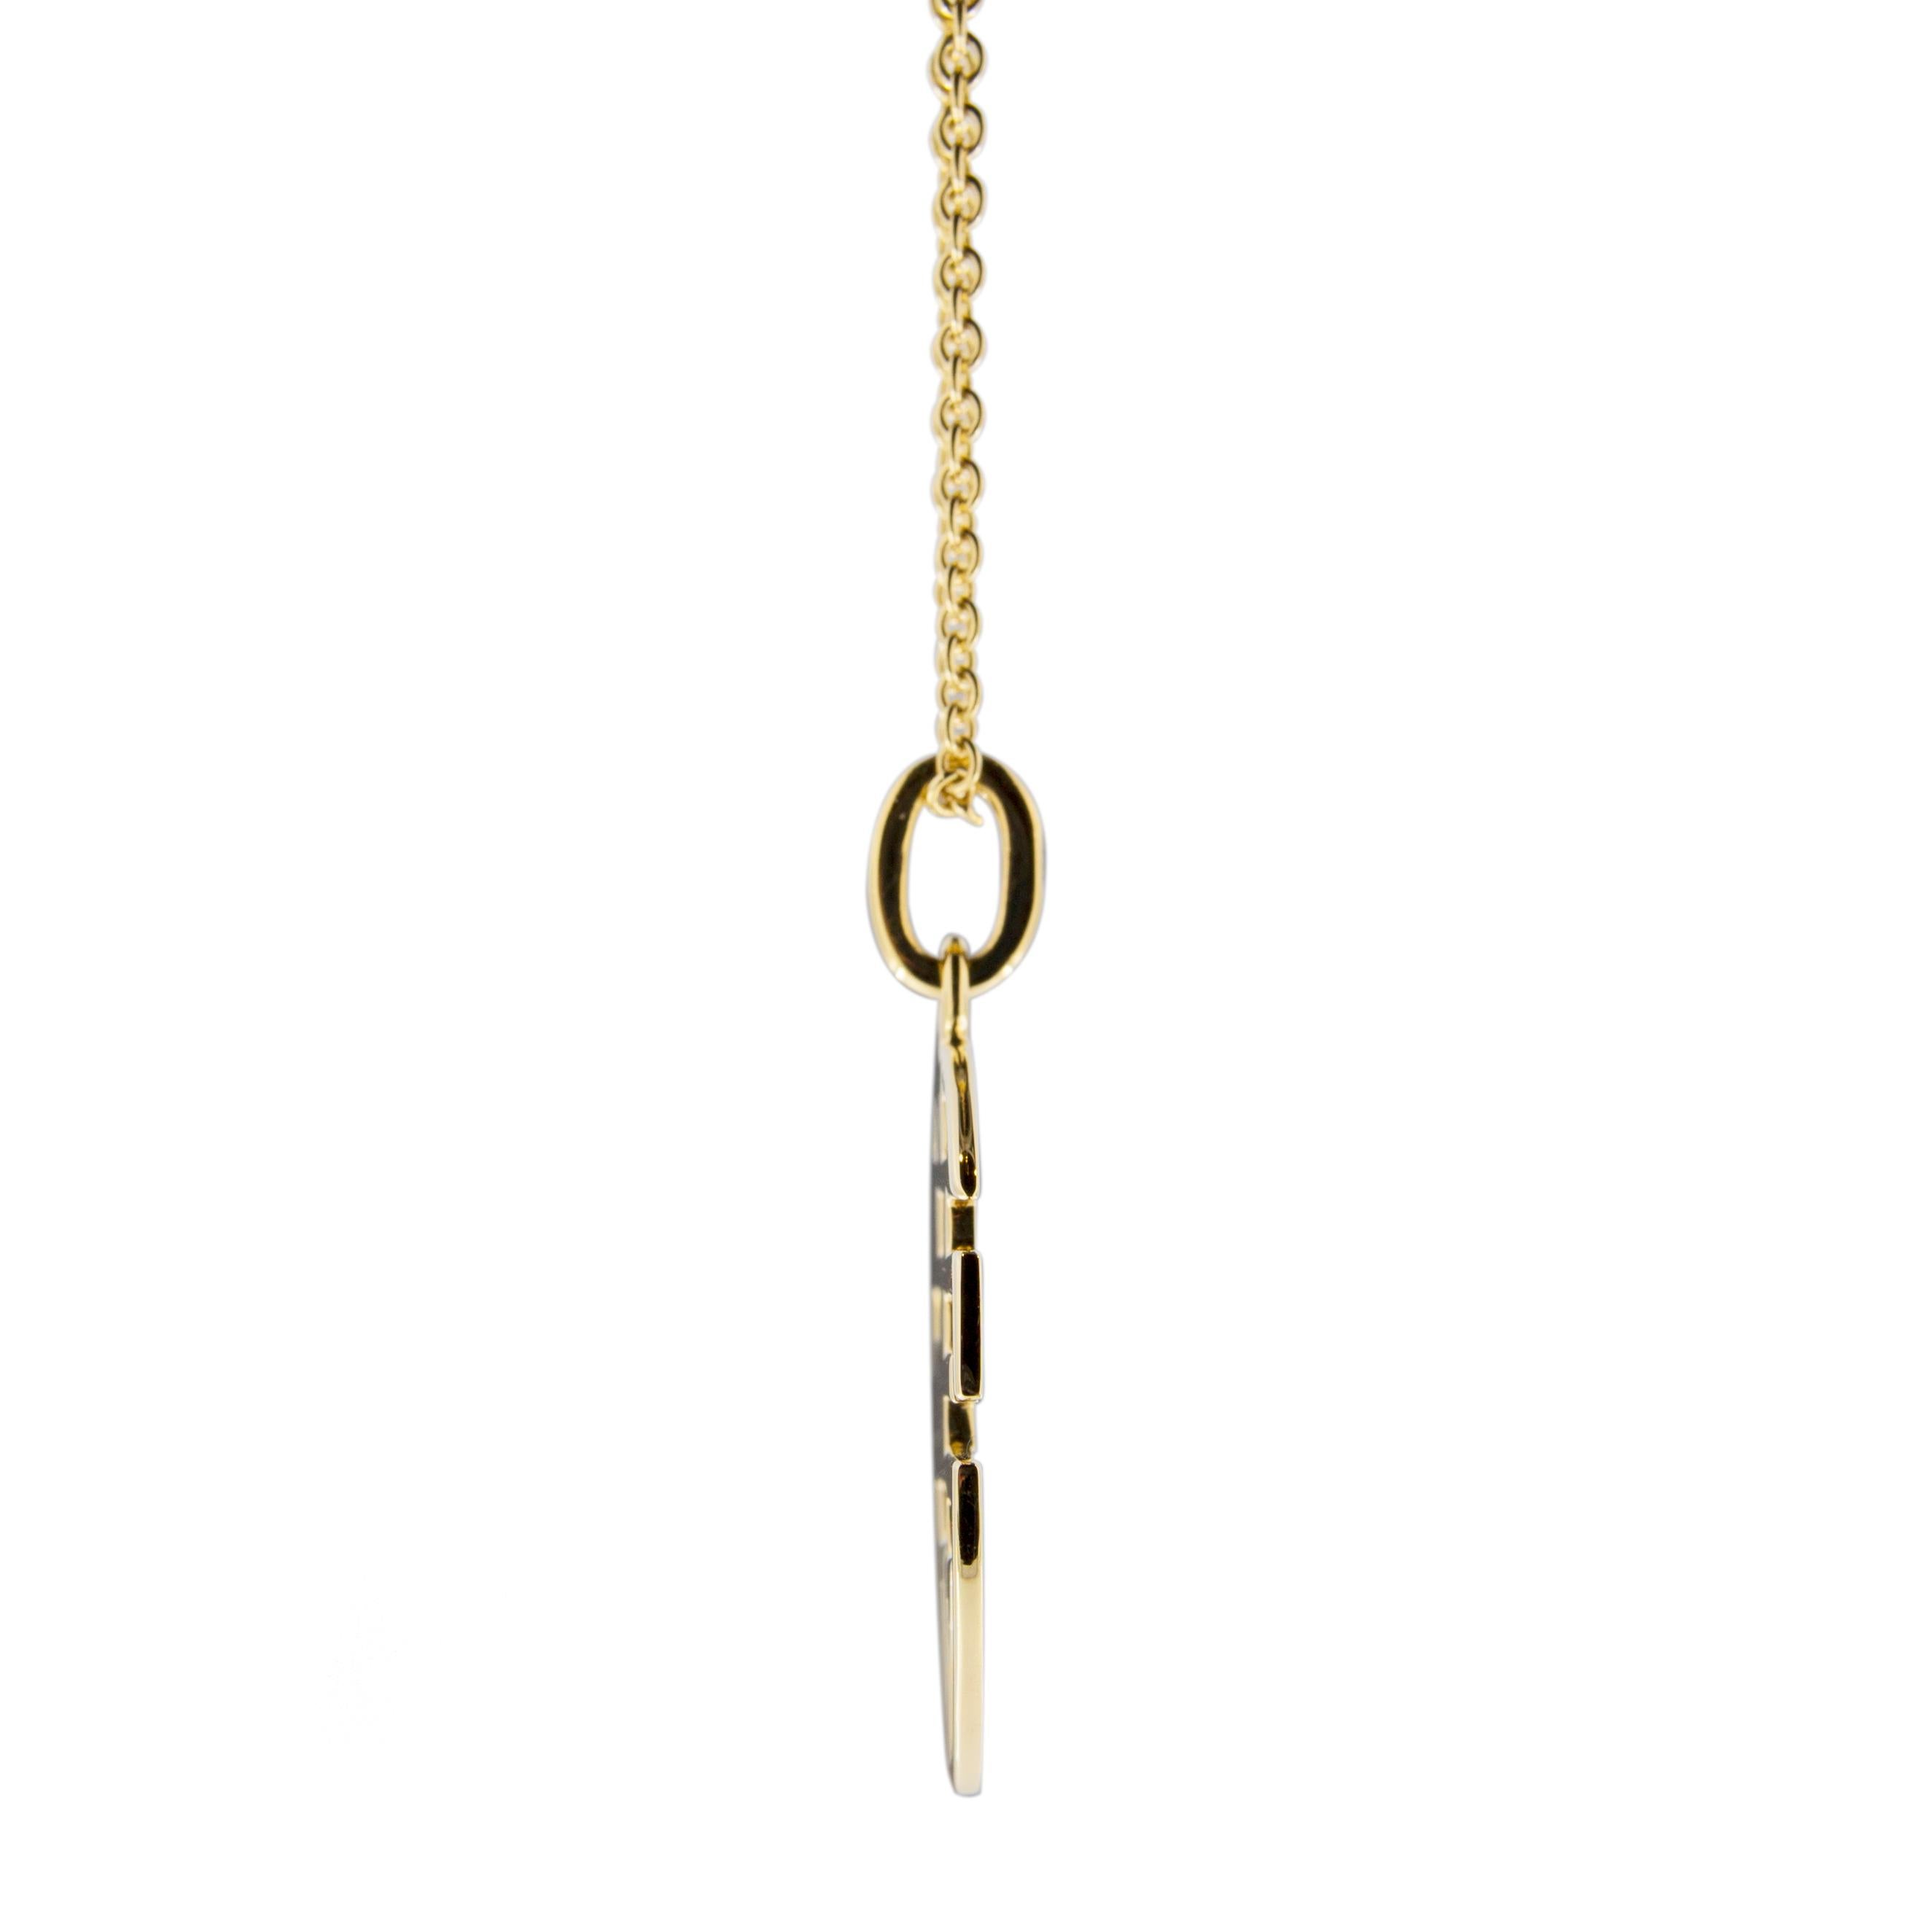 Alex Jona design collection, hand crafted in Italy, 18 karat yellow gold long and happy life Chinese symbol pendant. Measurement: Diameter 2.6 cm

Alex Jona jewels stand out, not only for their special design and for the excellent quality of the